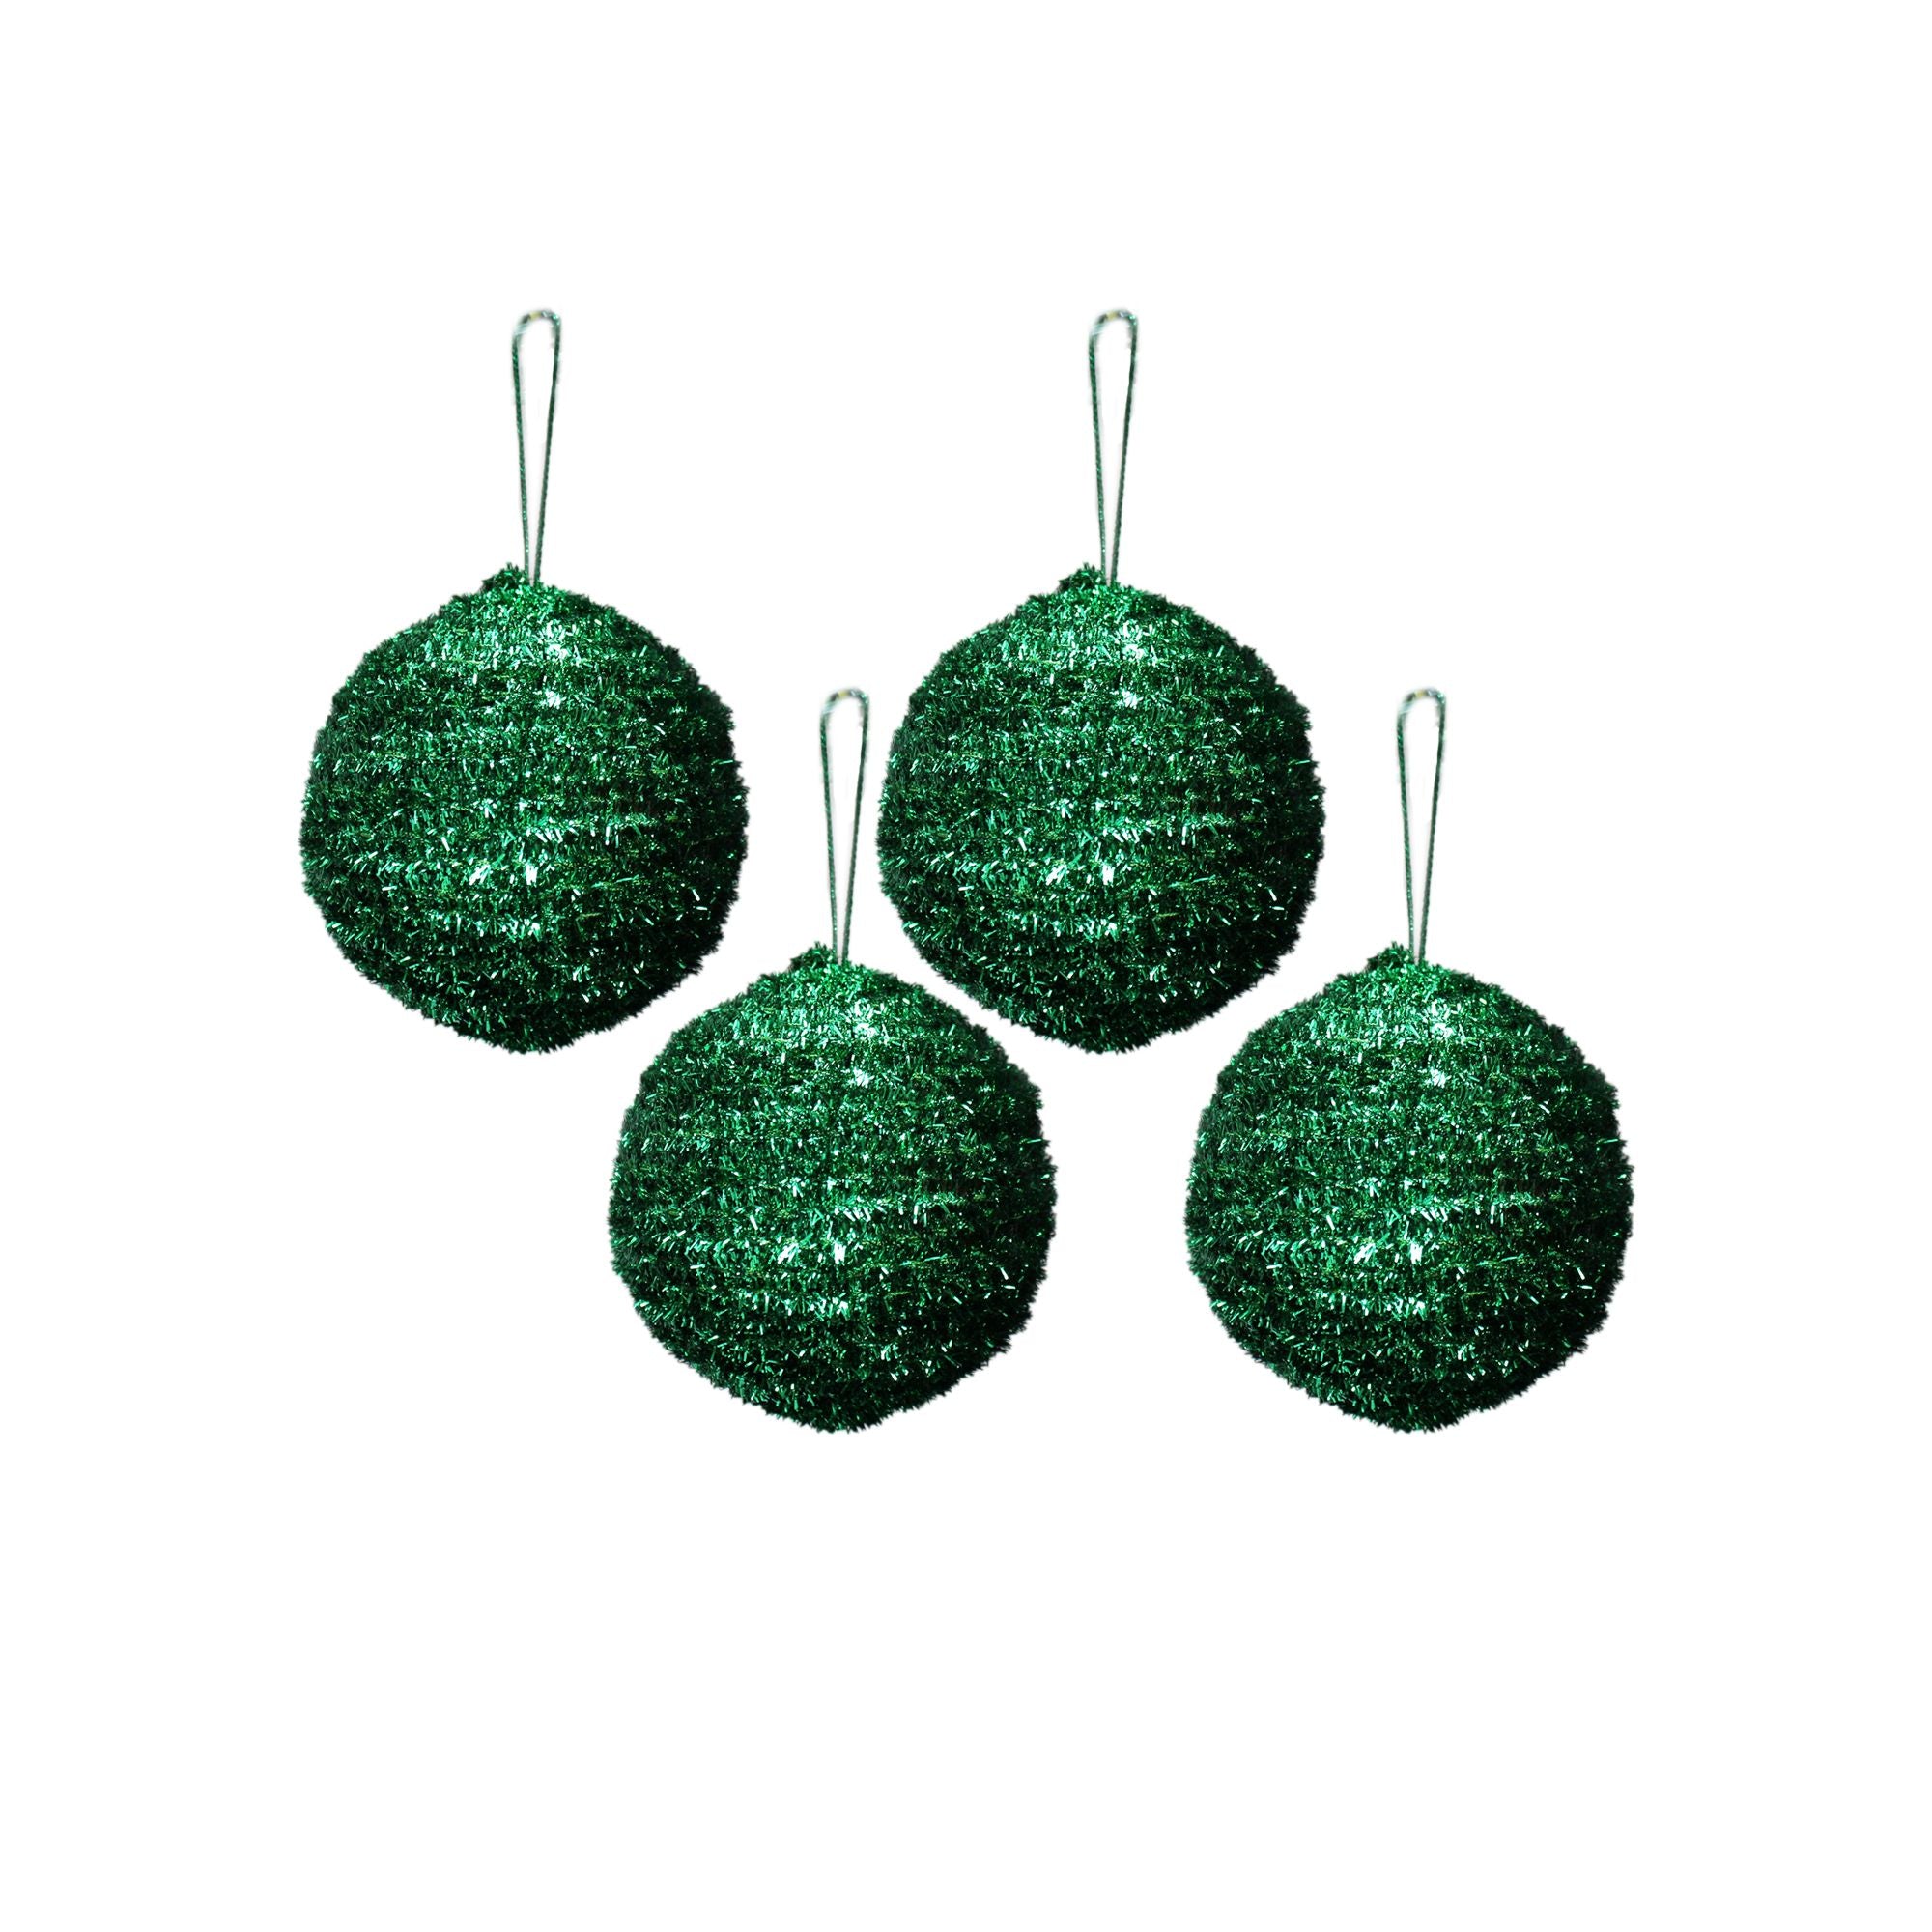 Handmade Christmas Ornaments - Tinsel Baubles, 50mm, Green, 4pc